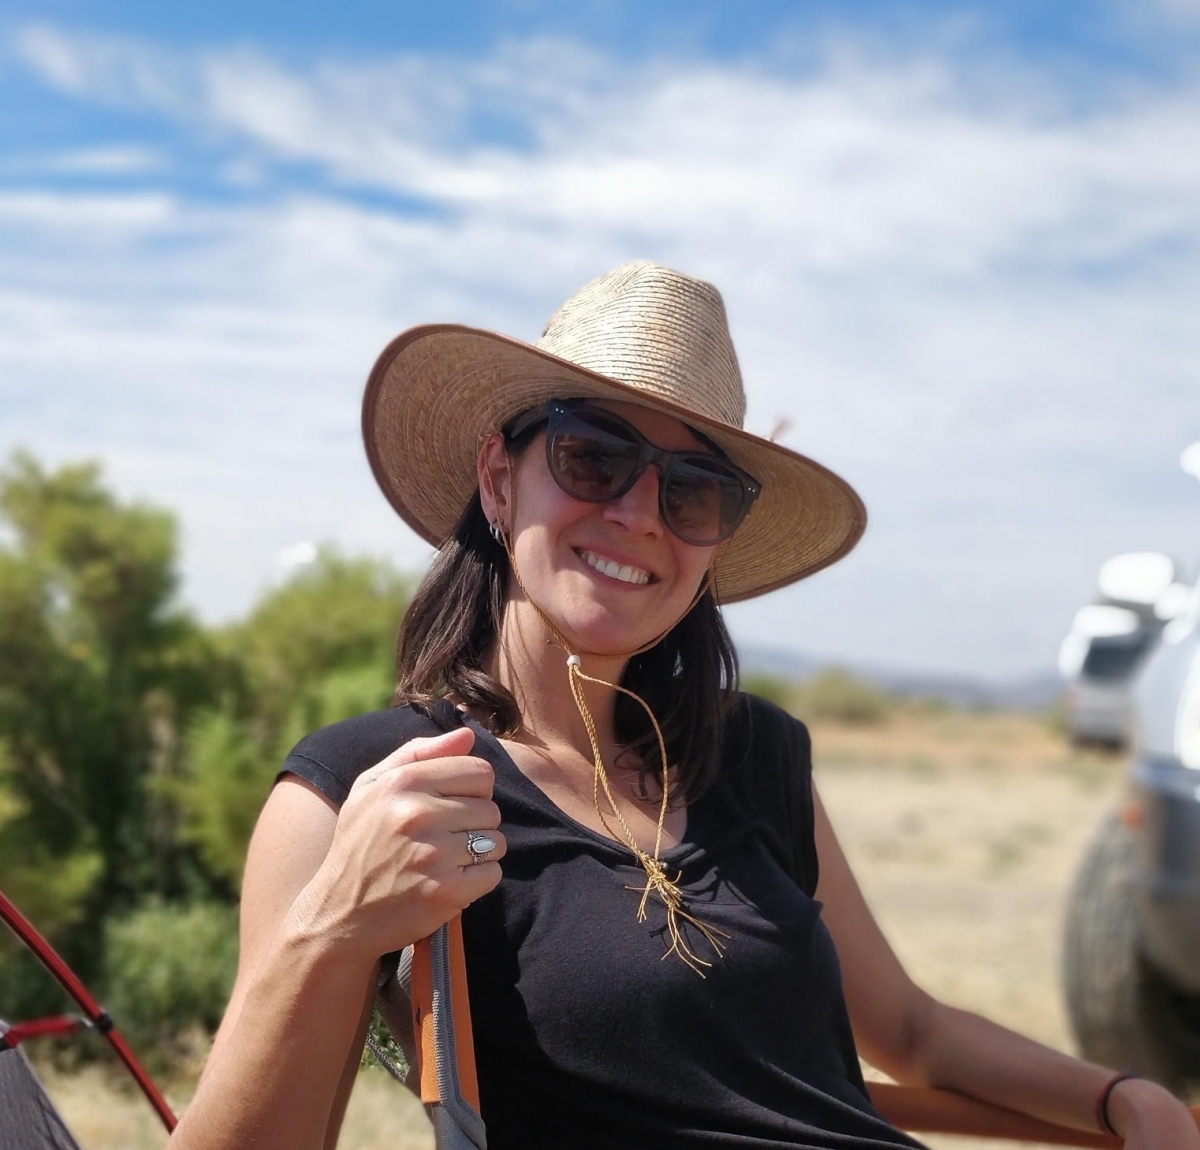 Smiling person outside in desert, wearing black sleeveless top, sunglasses, and a tan sunhat.